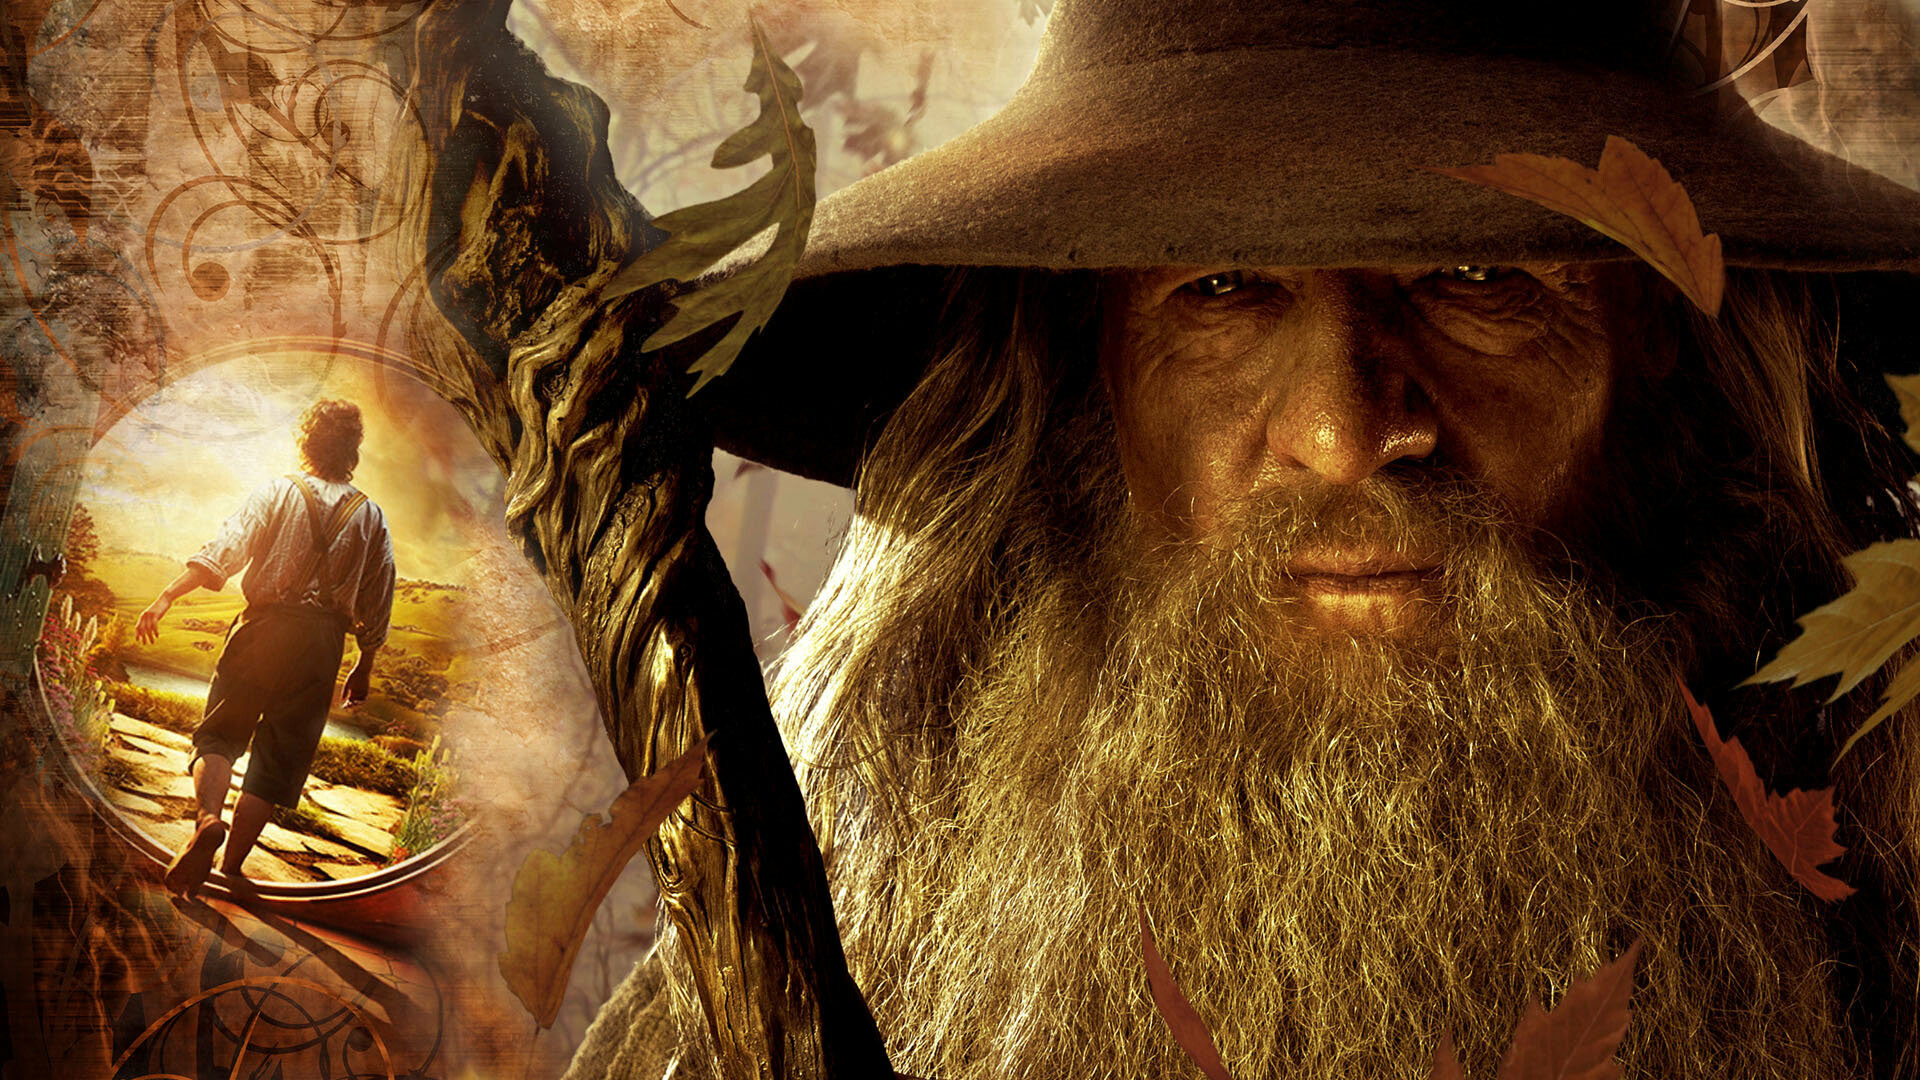 The Hobbit: Gandalf, A wizard and the bearer of one of the Three Rings. 1920x1080 Full HD Background.